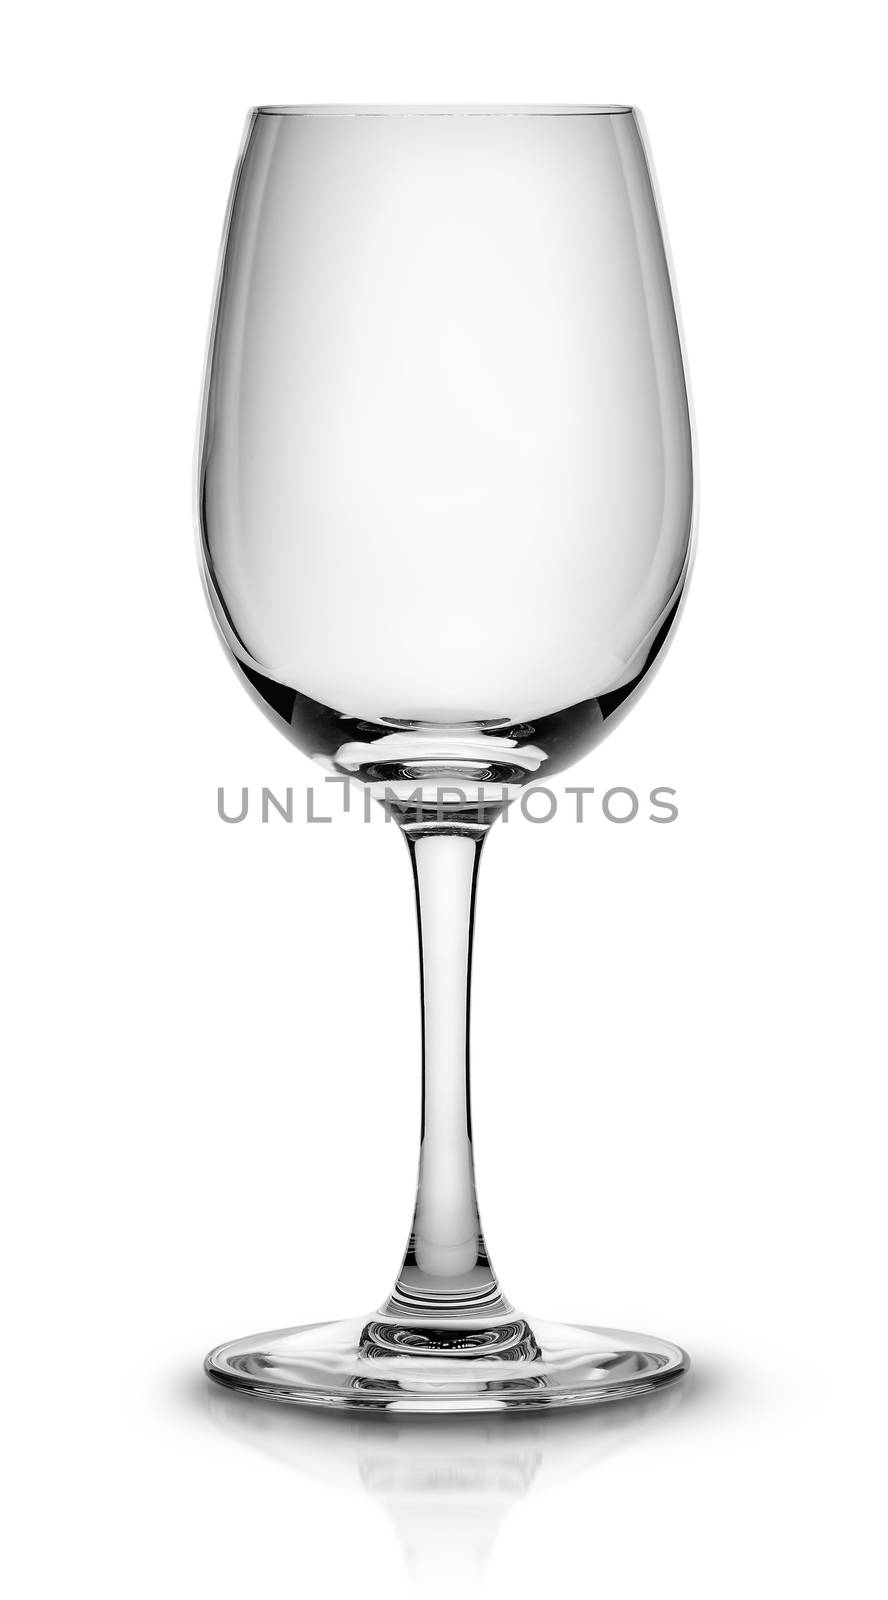 Empty wine glass for white wine by Cipariss